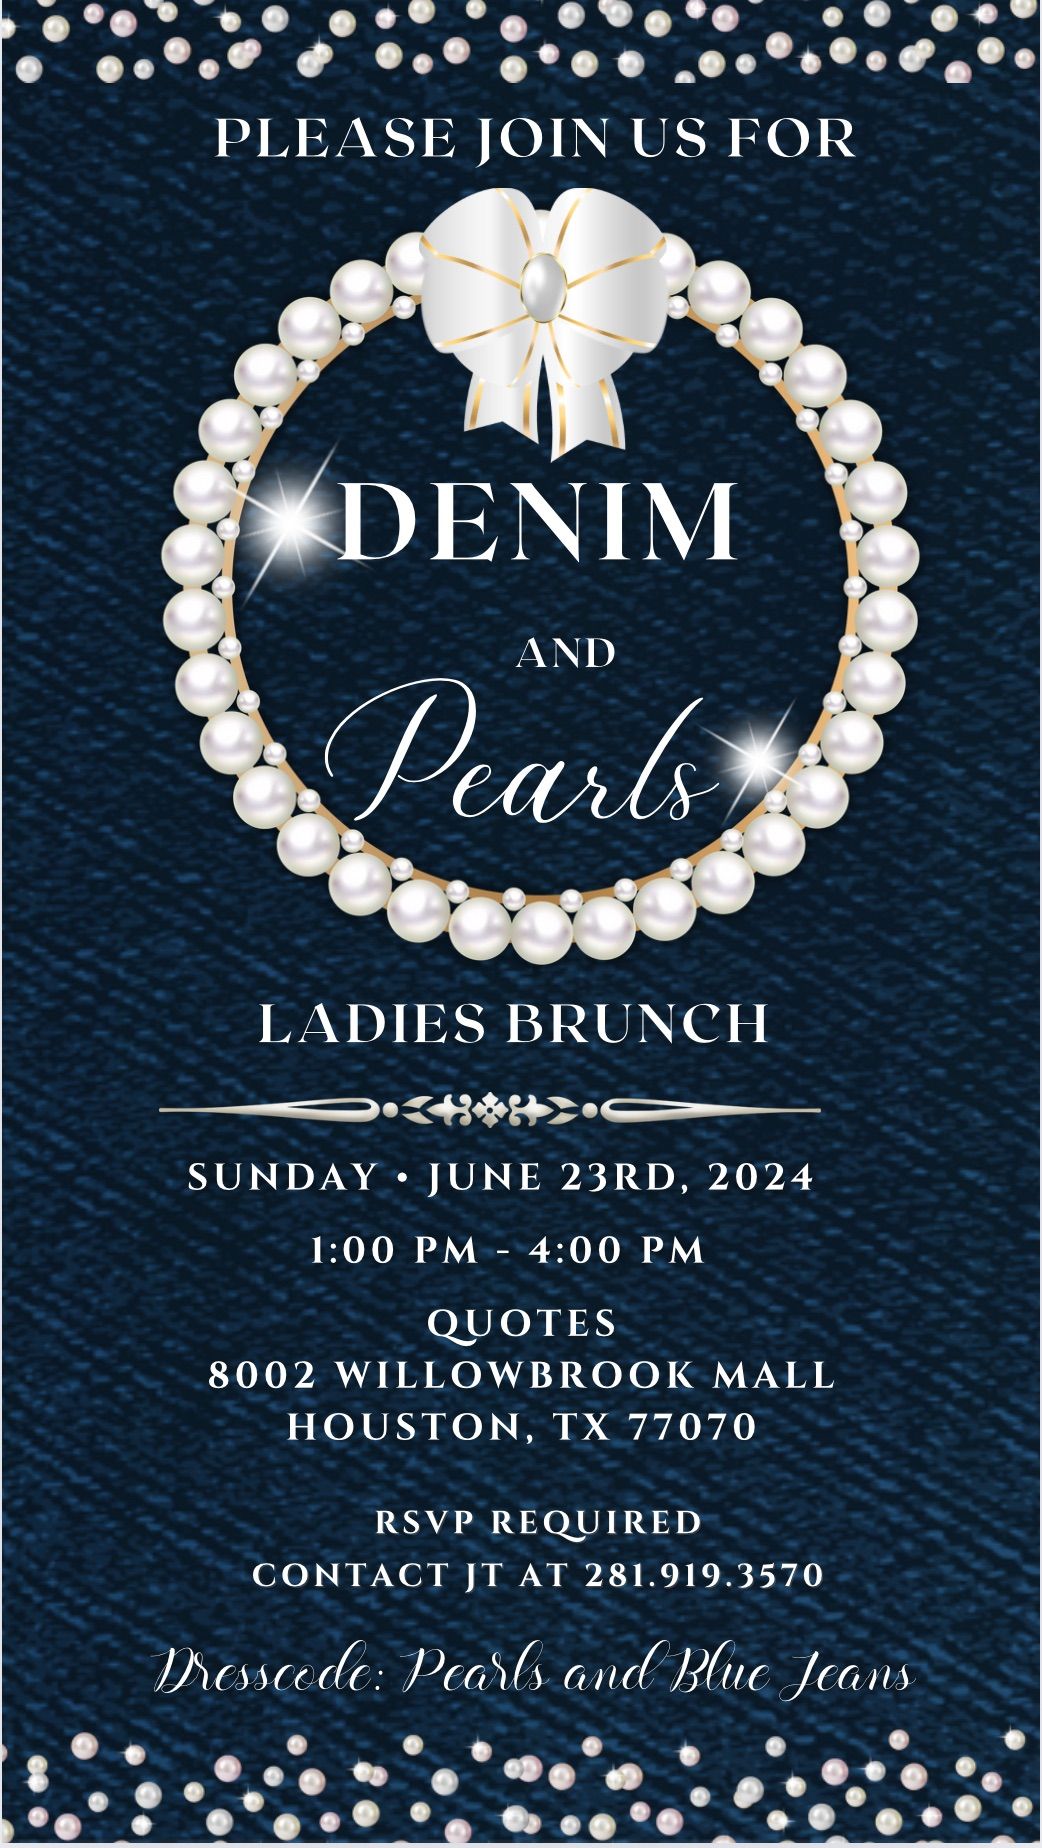 Denim and Pearls Brunch